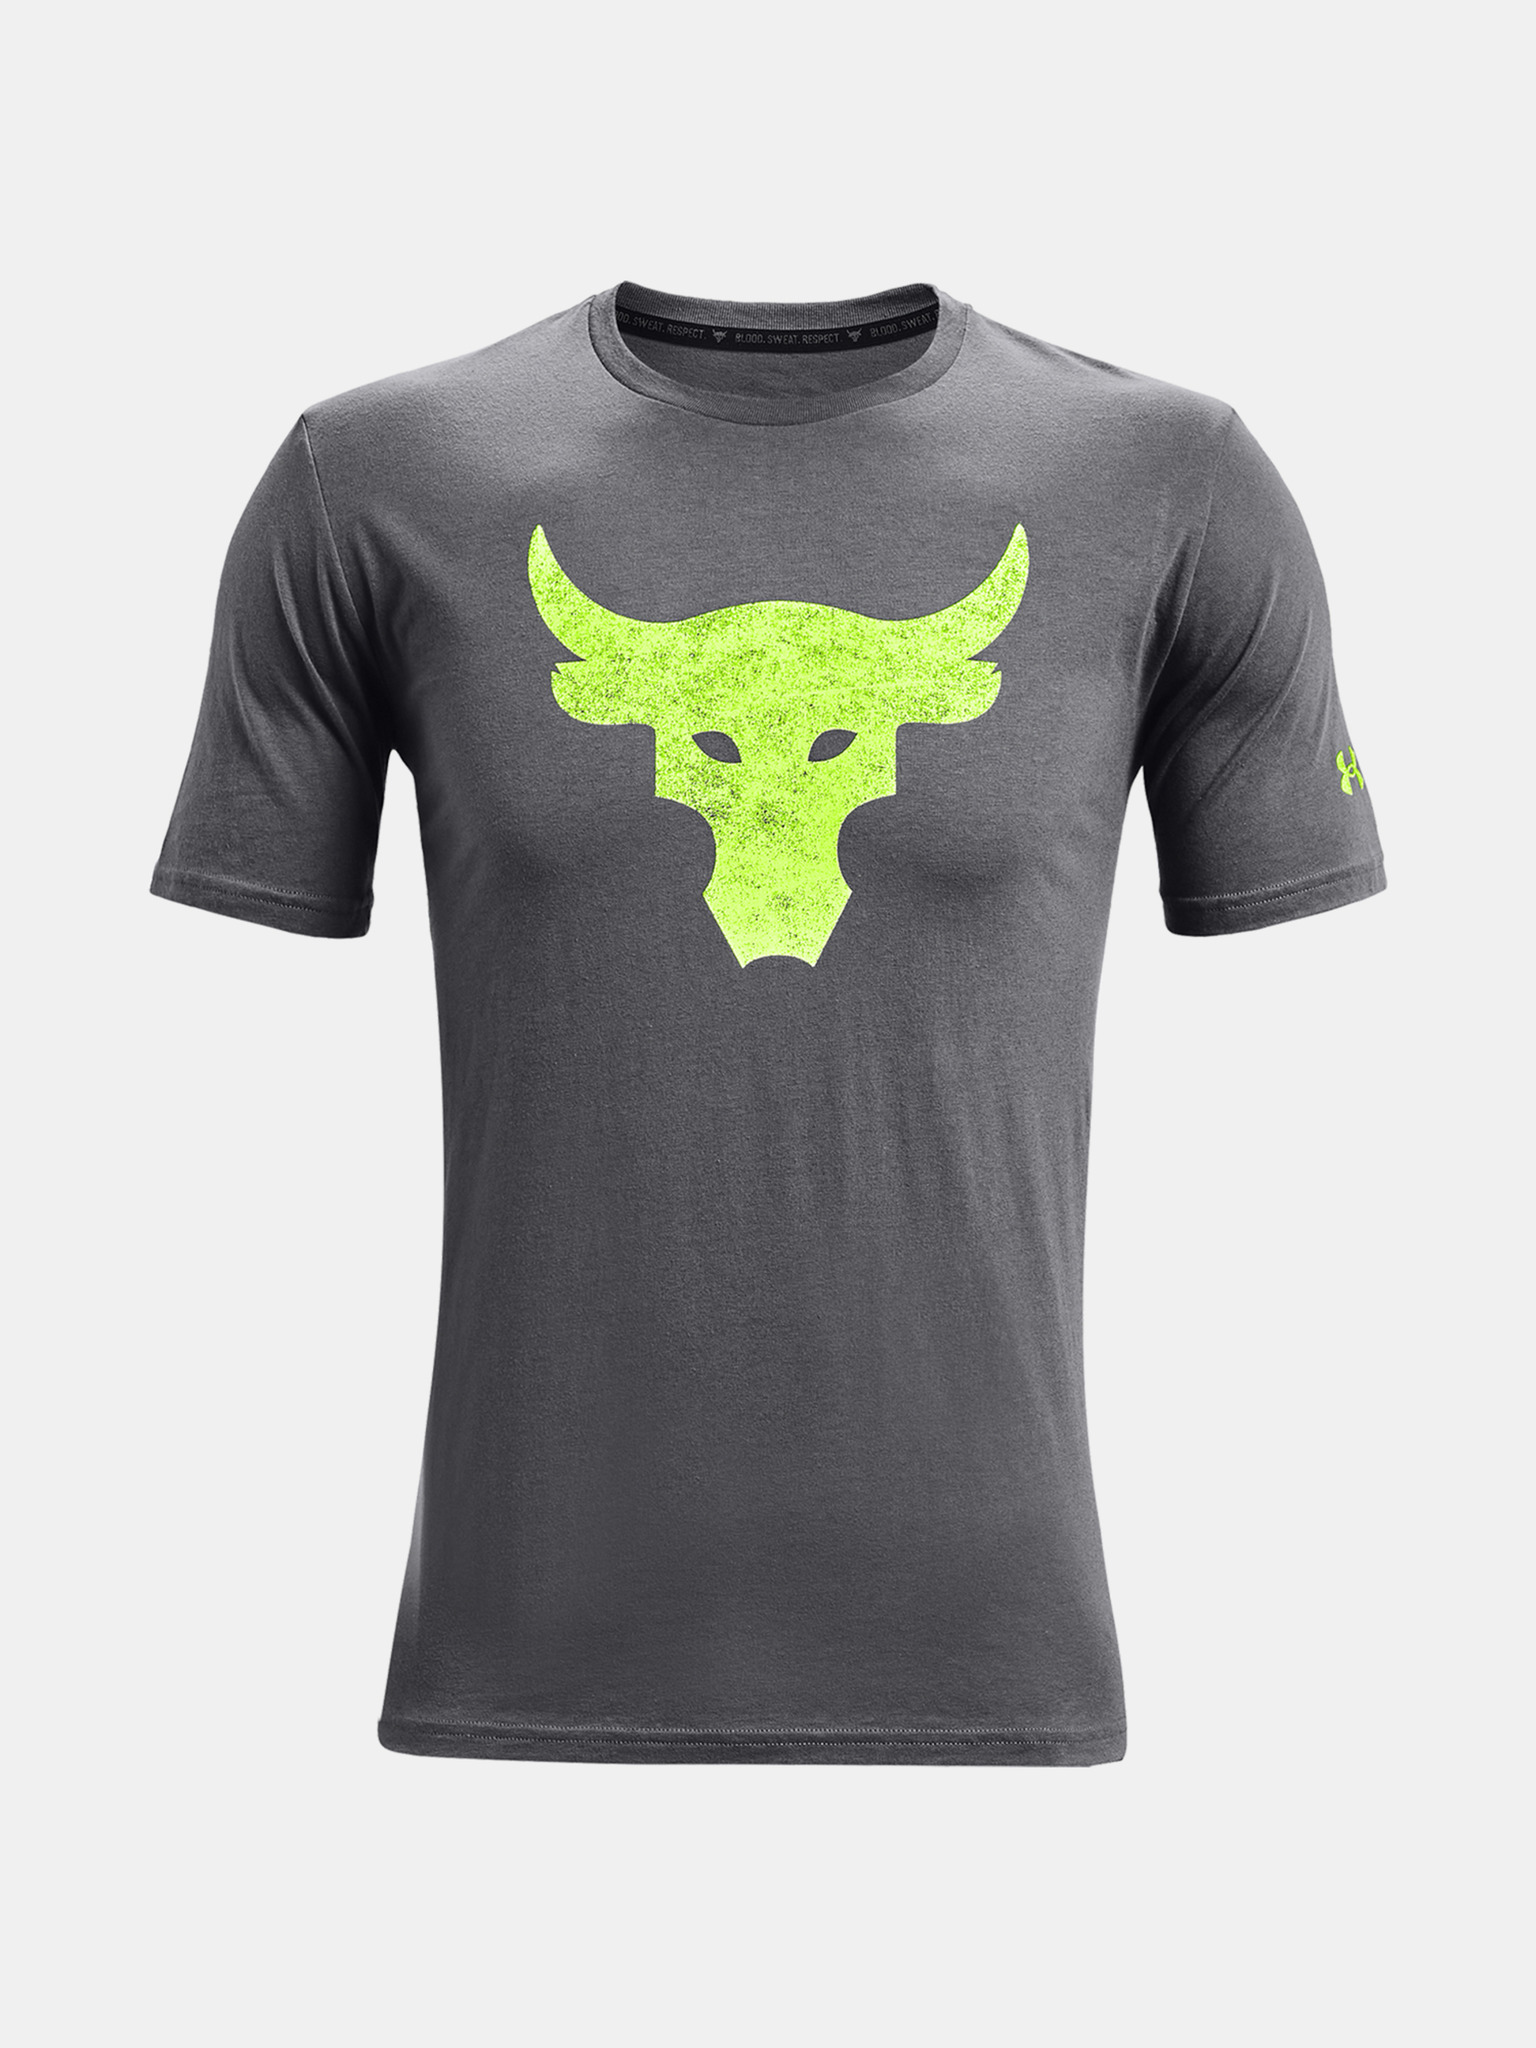 REMERA COMPRESION HG COMP UNDER ARMOUR